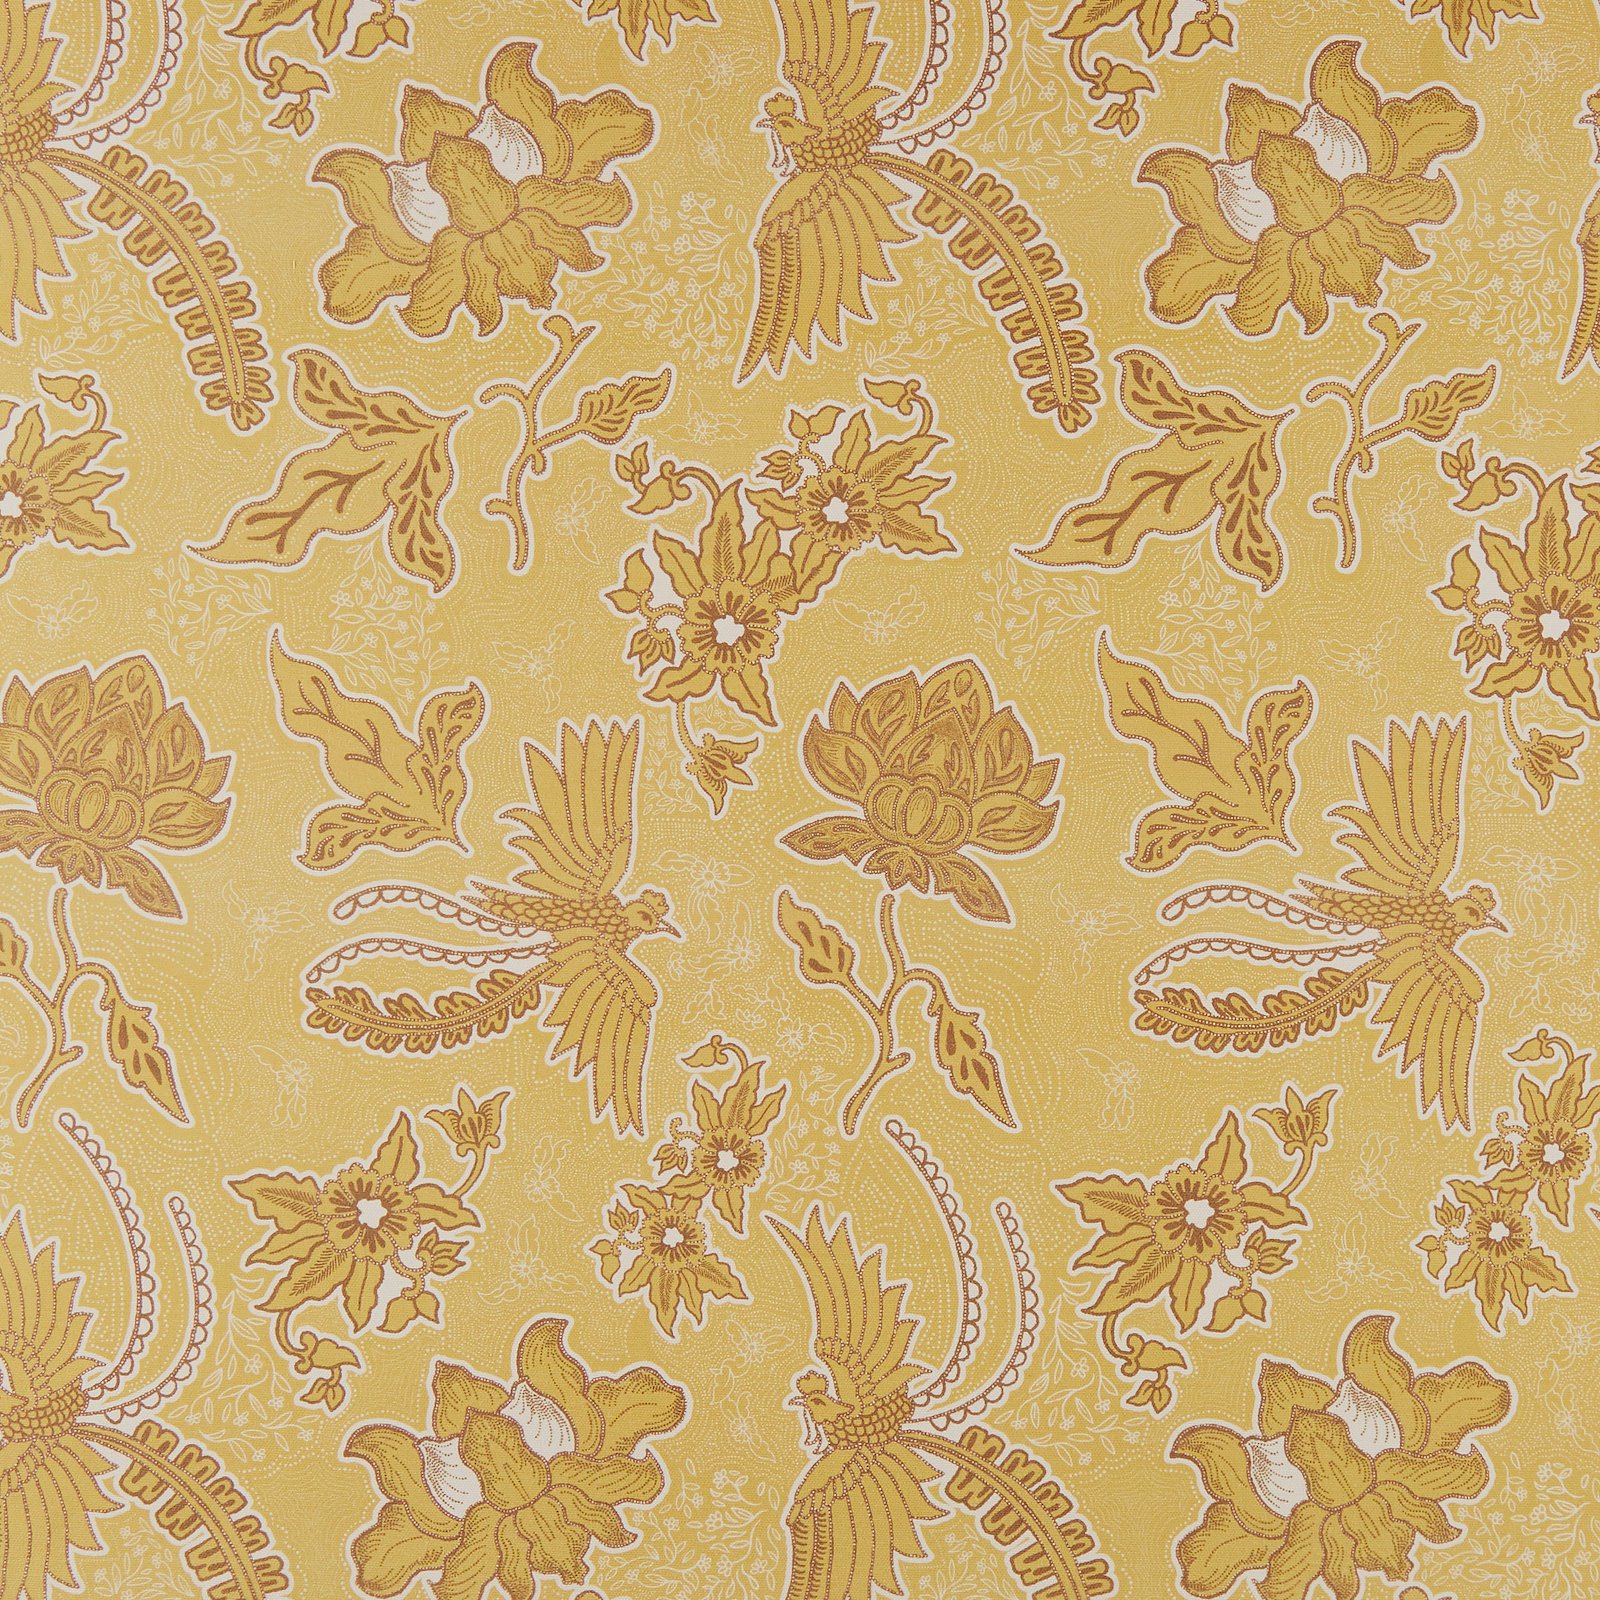 Upholstery panama yellow cranes/flowers 826512_pack_sp